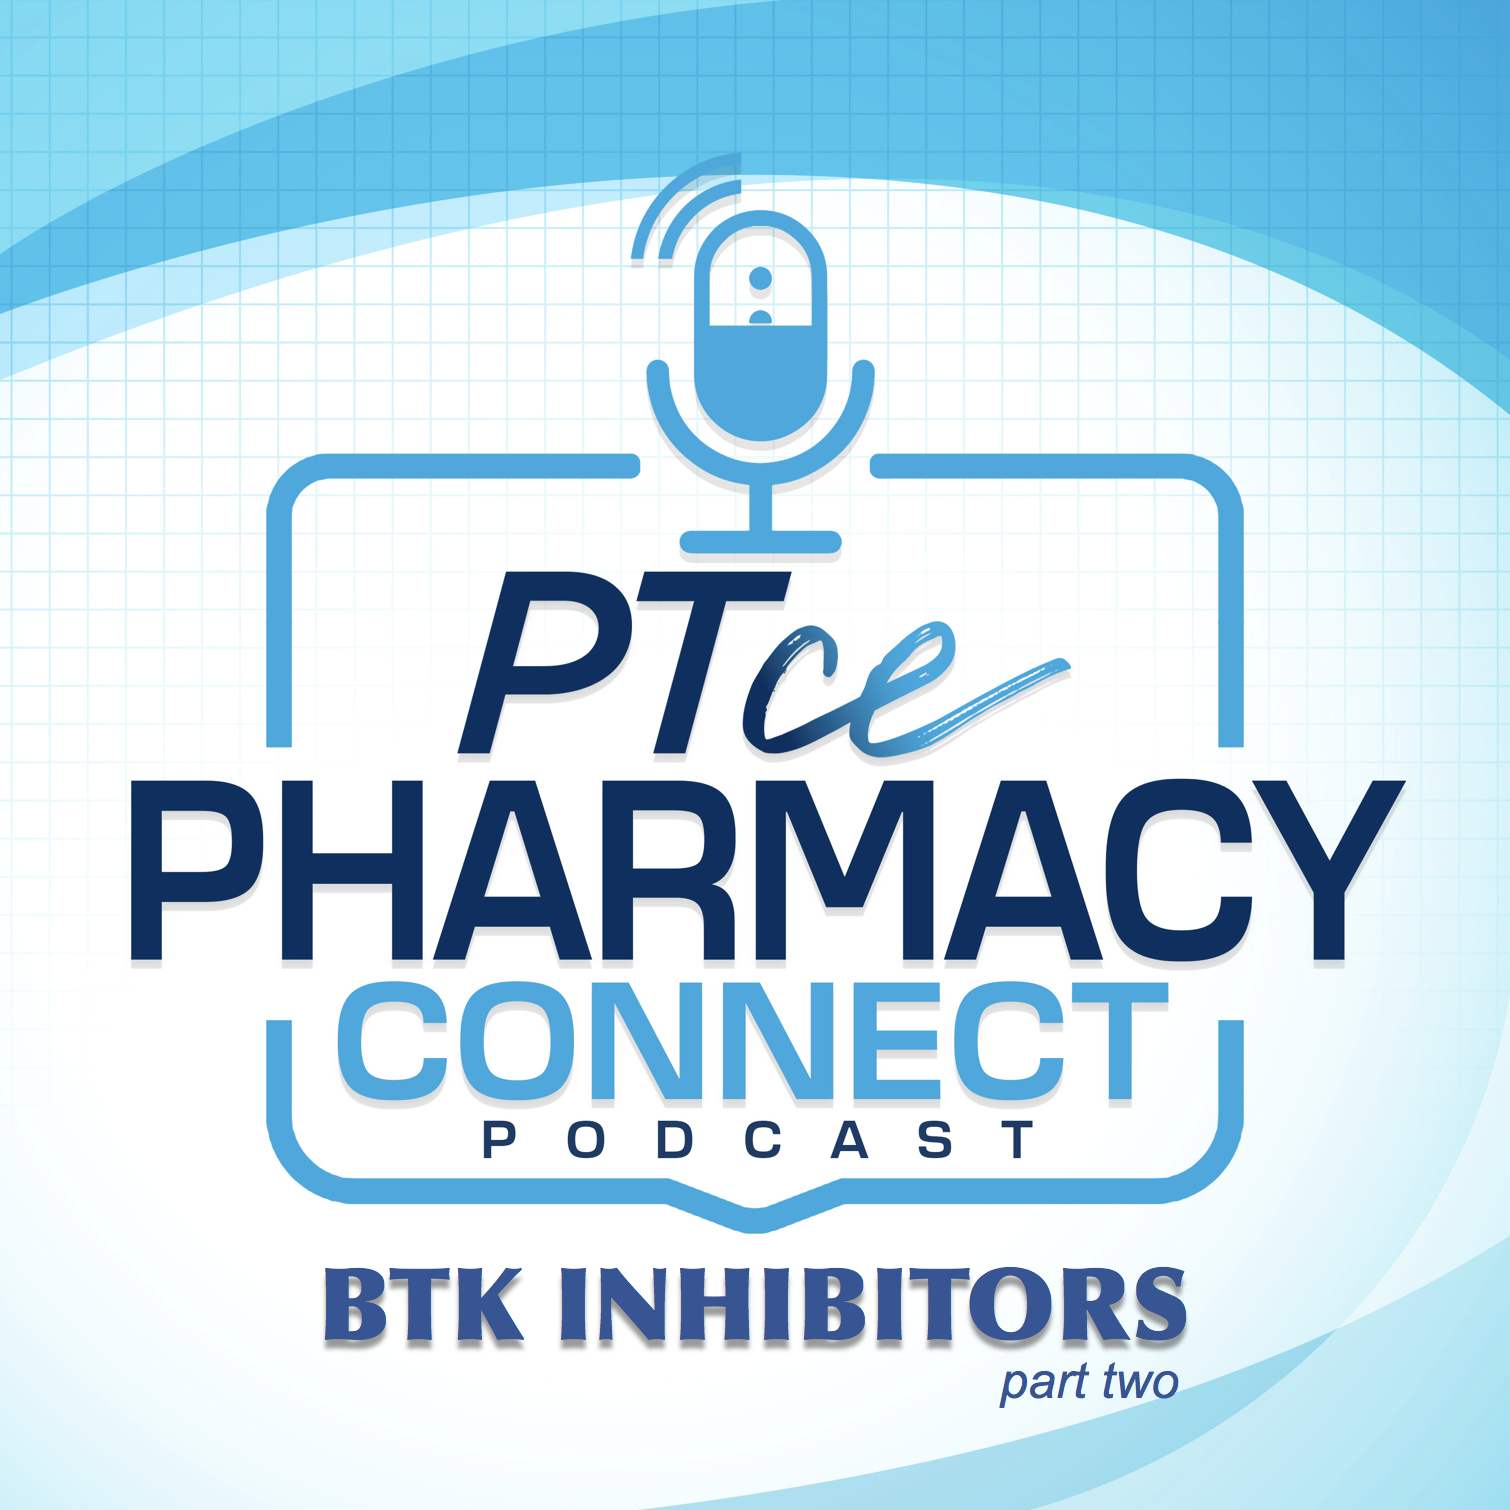 Implementing Digital Technology Tools within Health-Systems for Improving Adherence and Patient Support | PTCE Pharmacy Connect